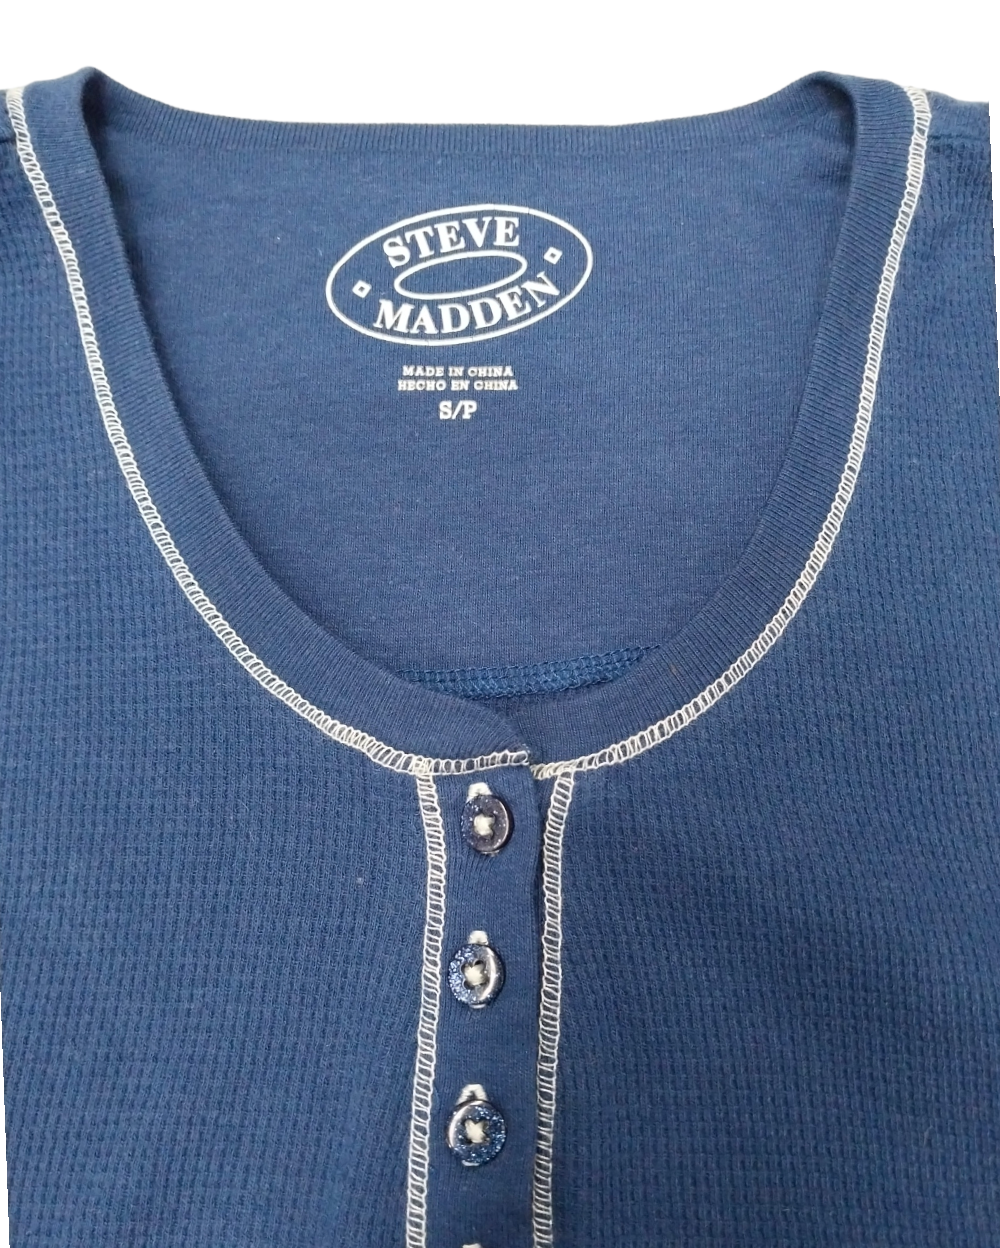 Blusas Casuales Steve Madden